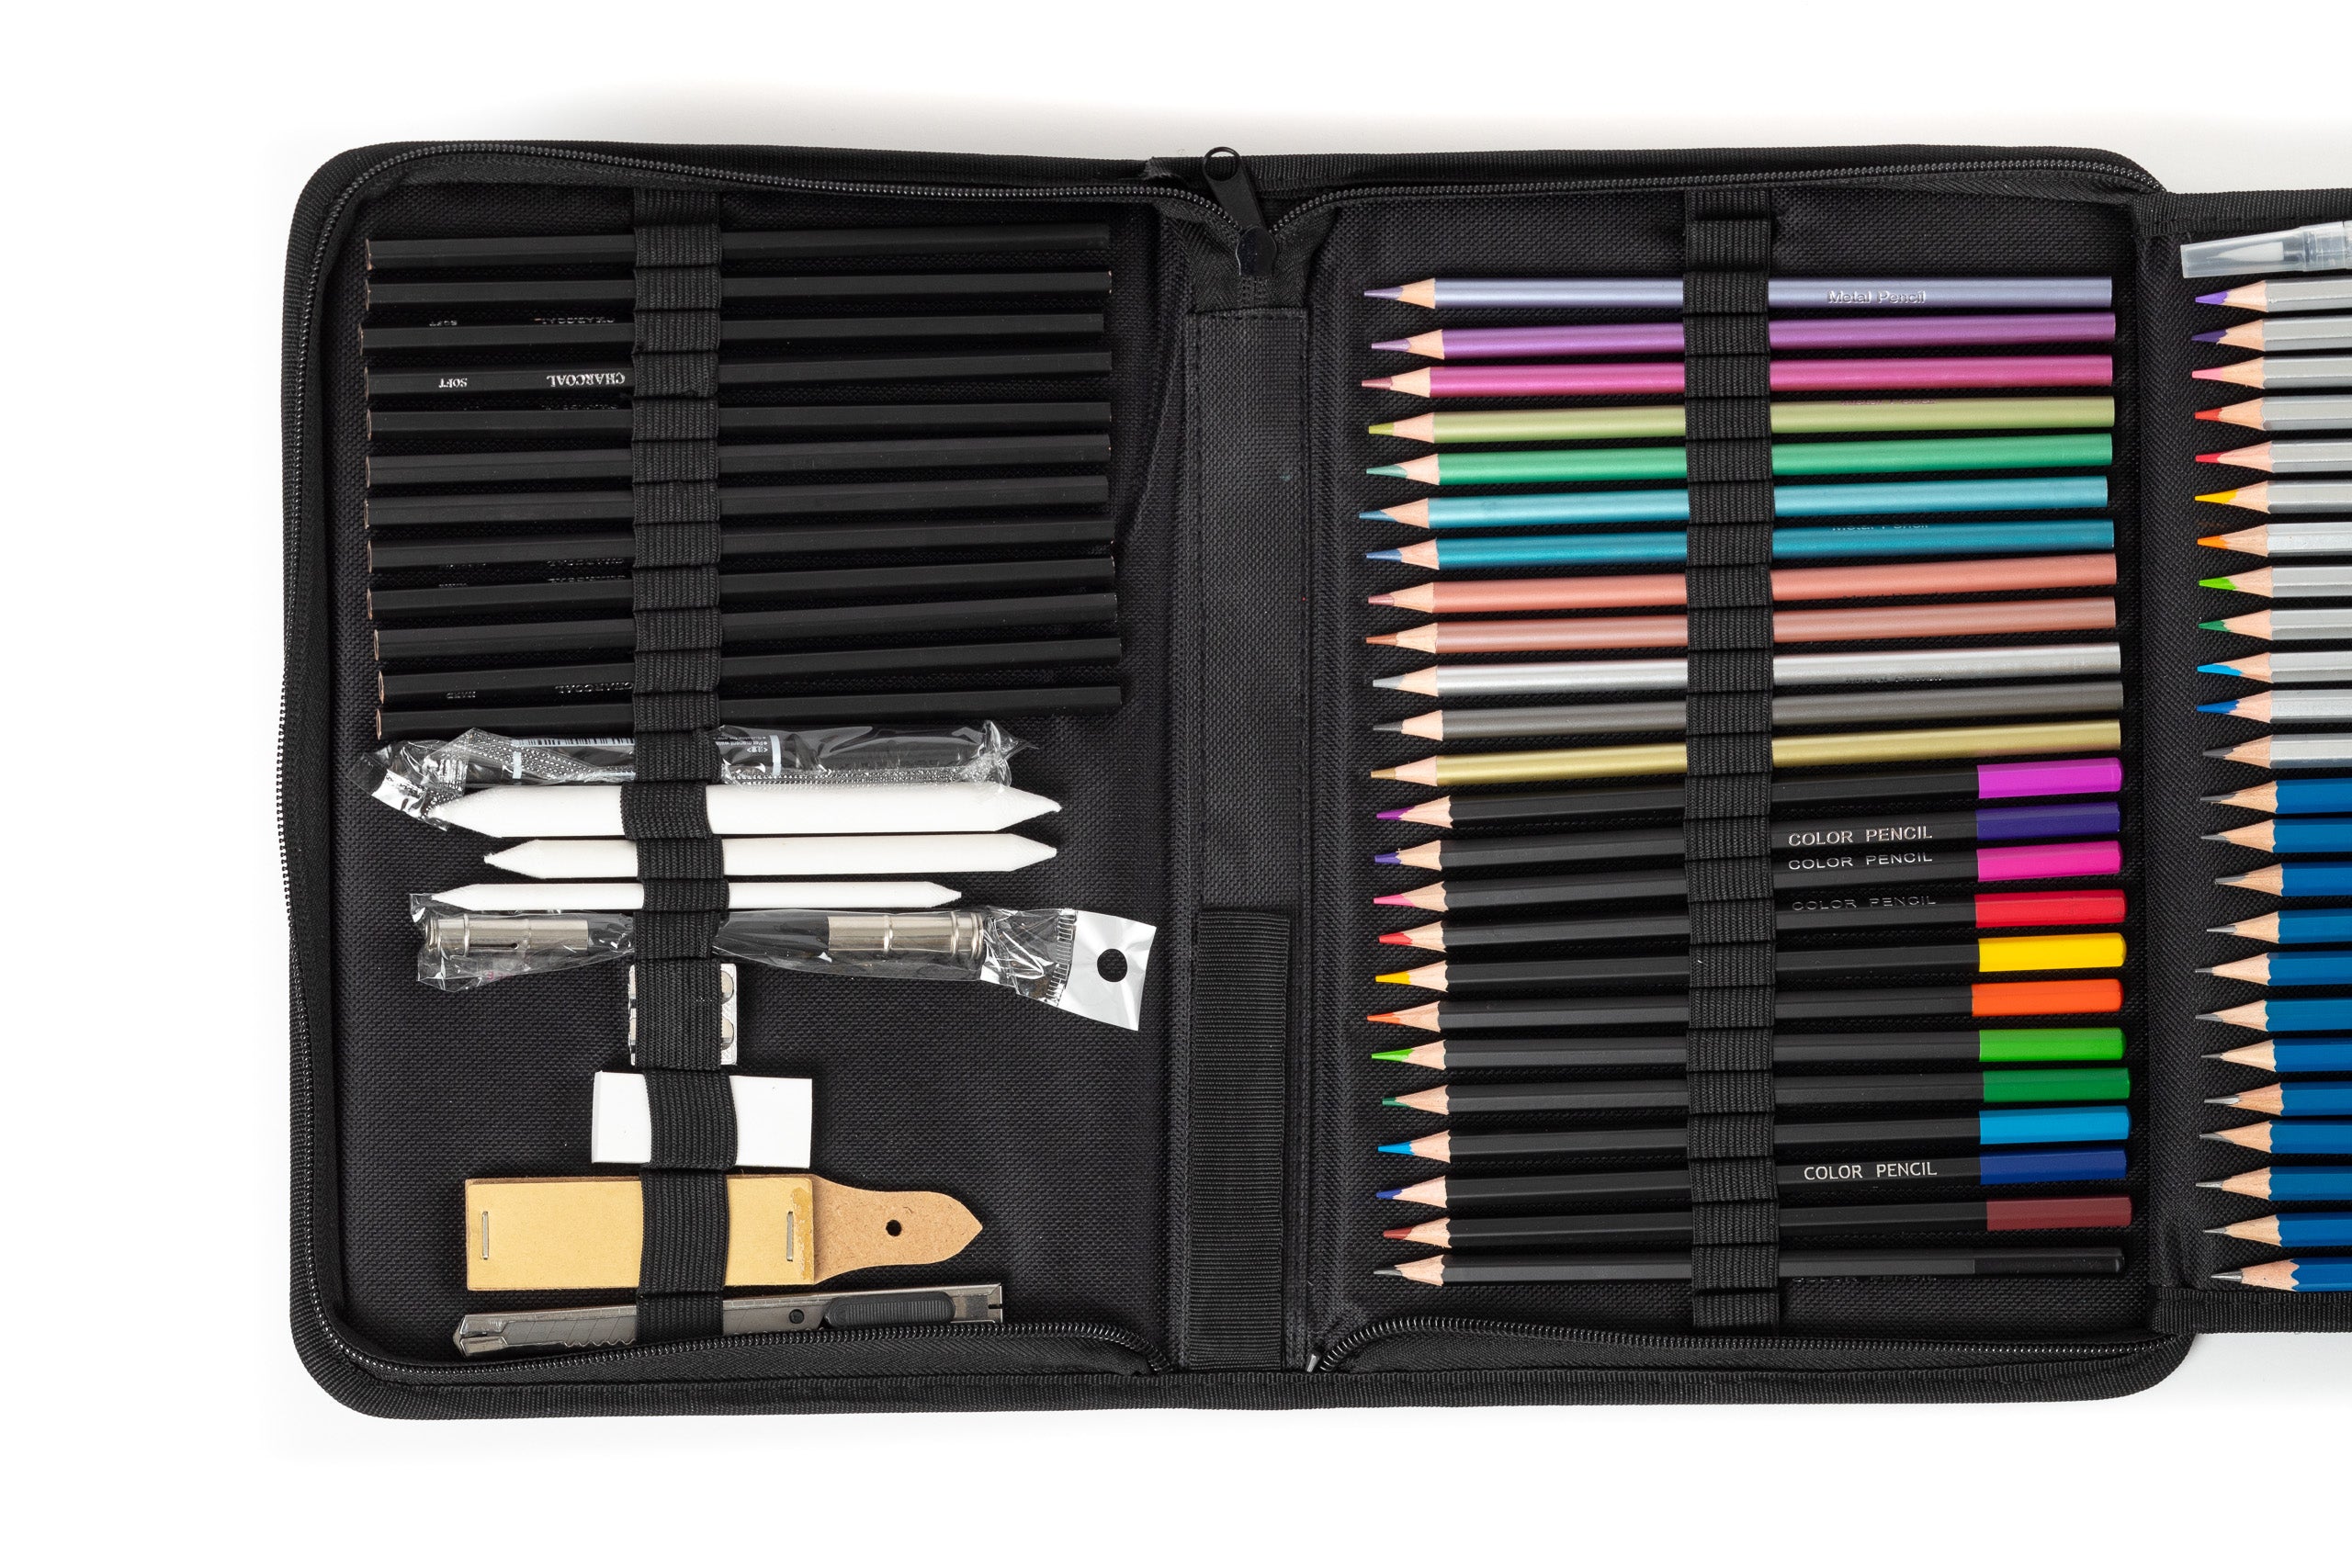 72 Piece Dream Art Kit for Colored Pencil Drawing Includes 60 Professional Sketch Pencils, Sketchbook and Tools